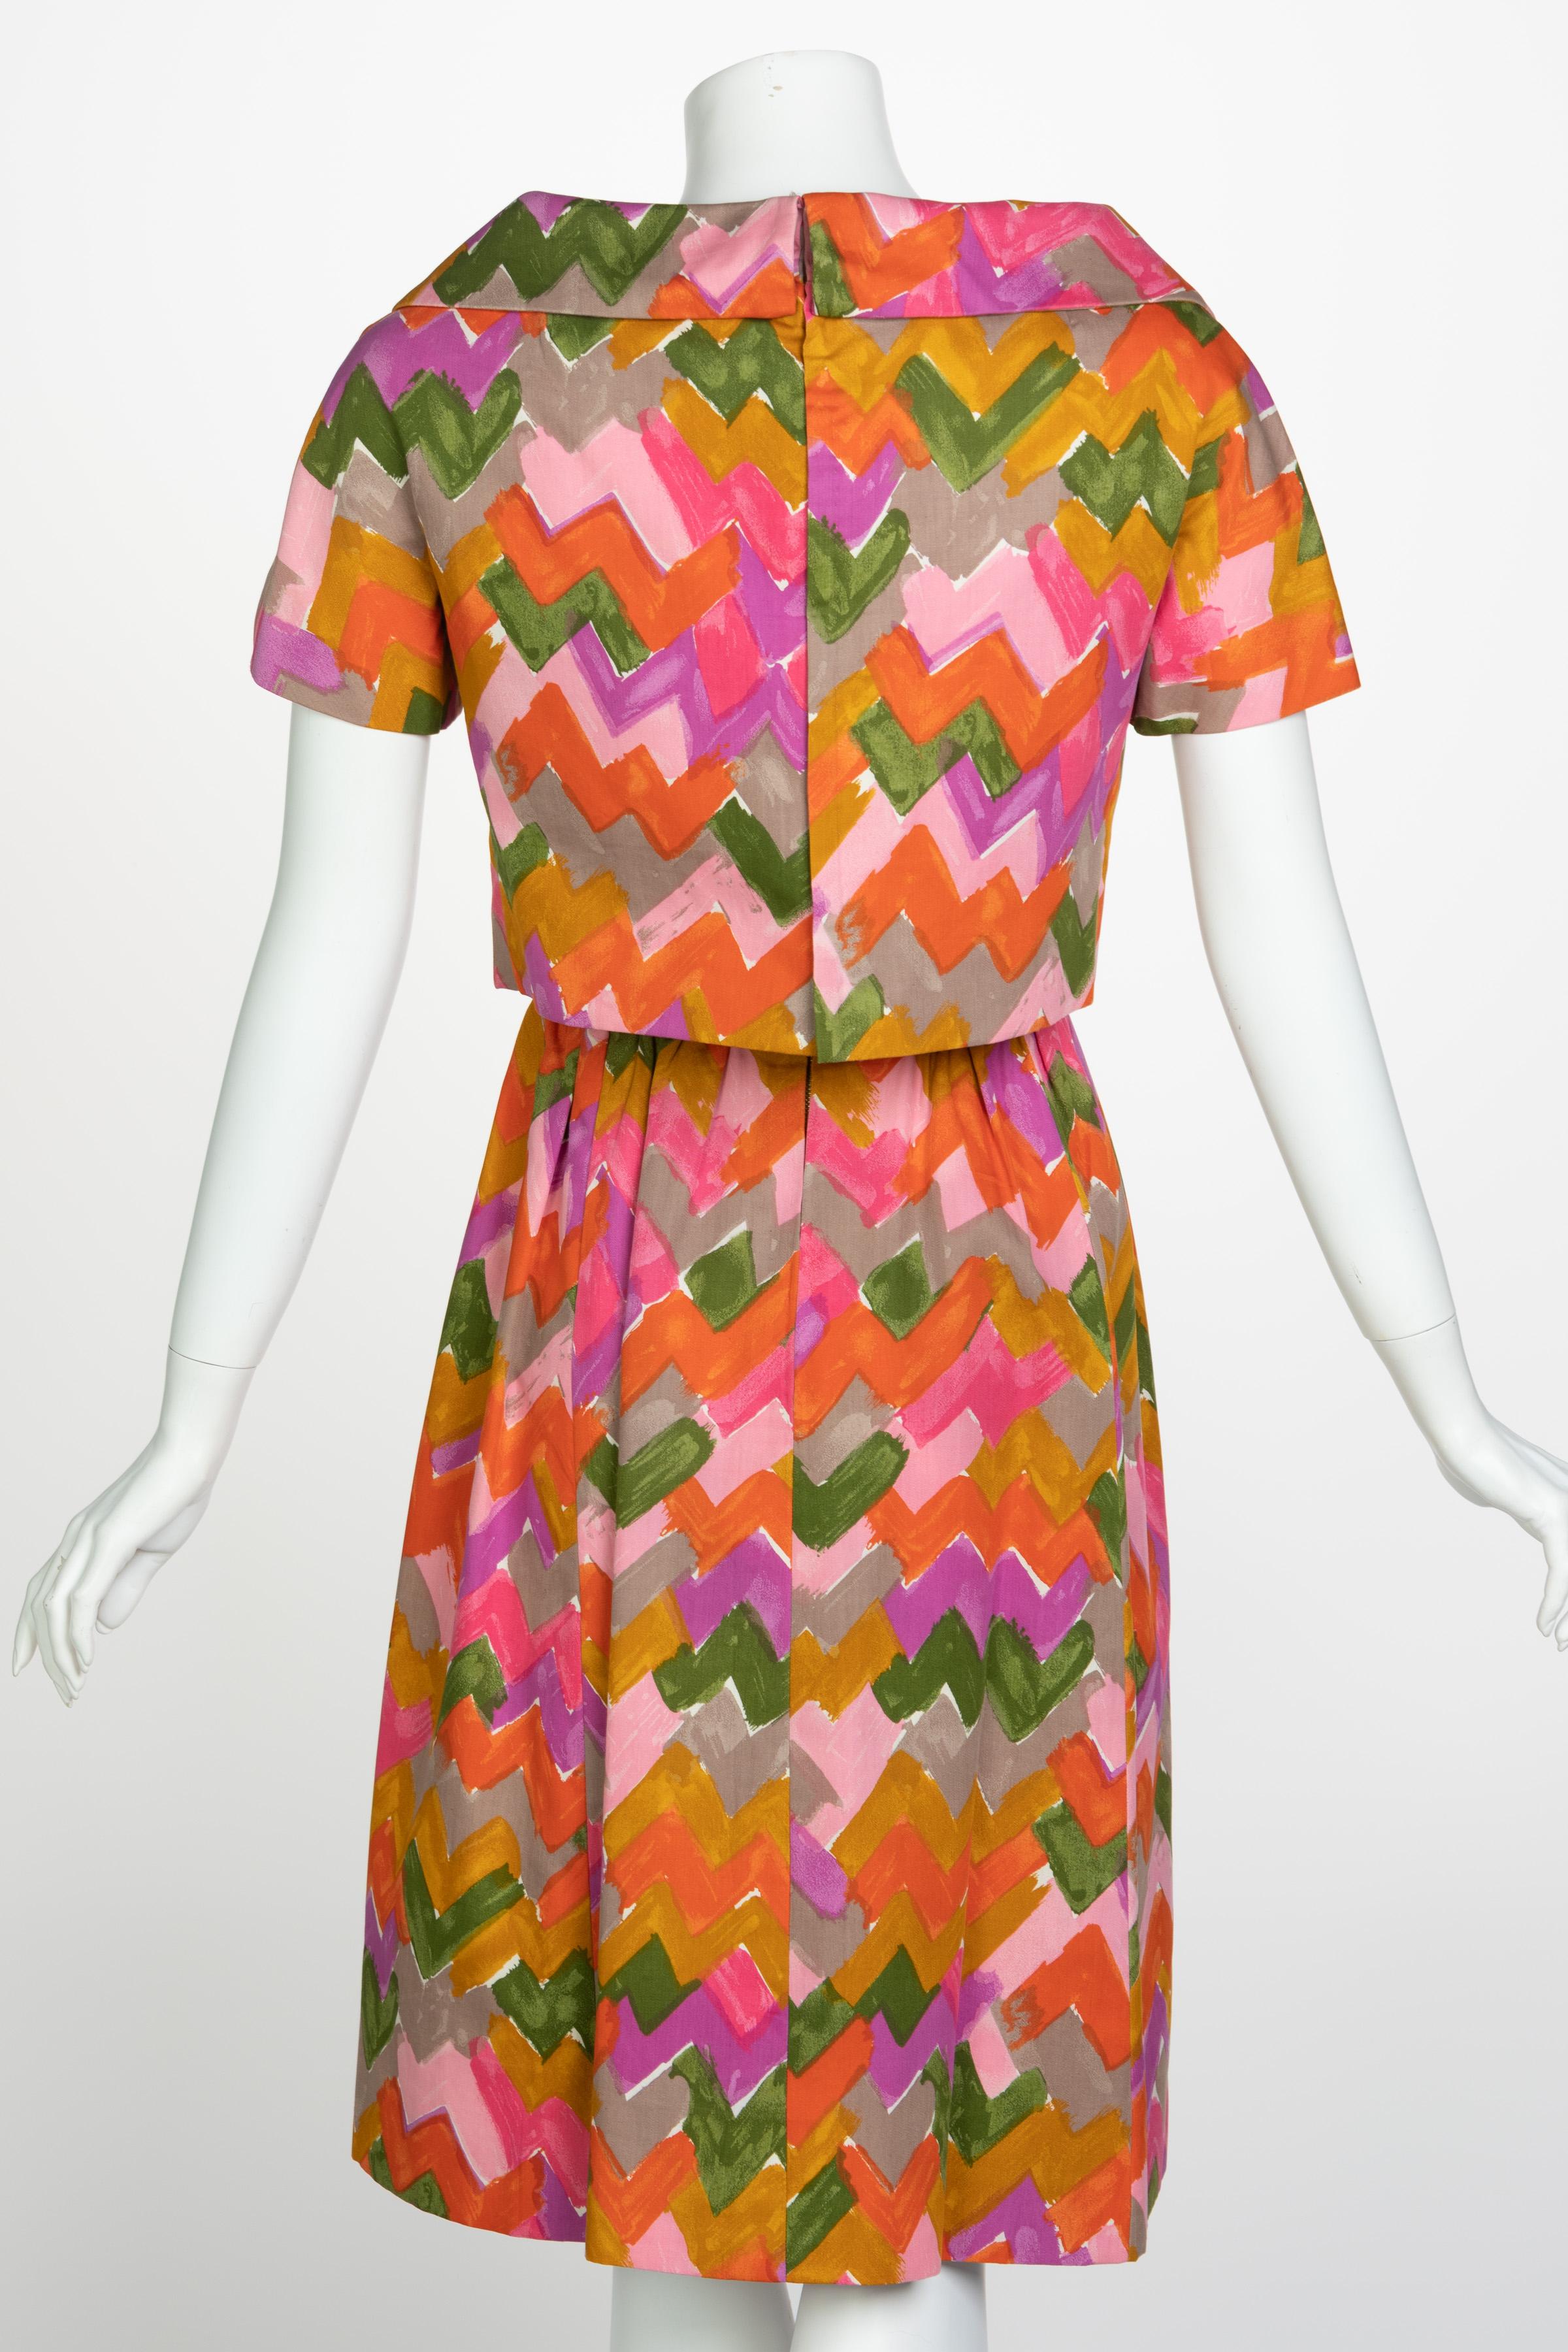 Christian Dior Demi-Couture Colorful Chevron Tailored Belted Dress, 1950s 1